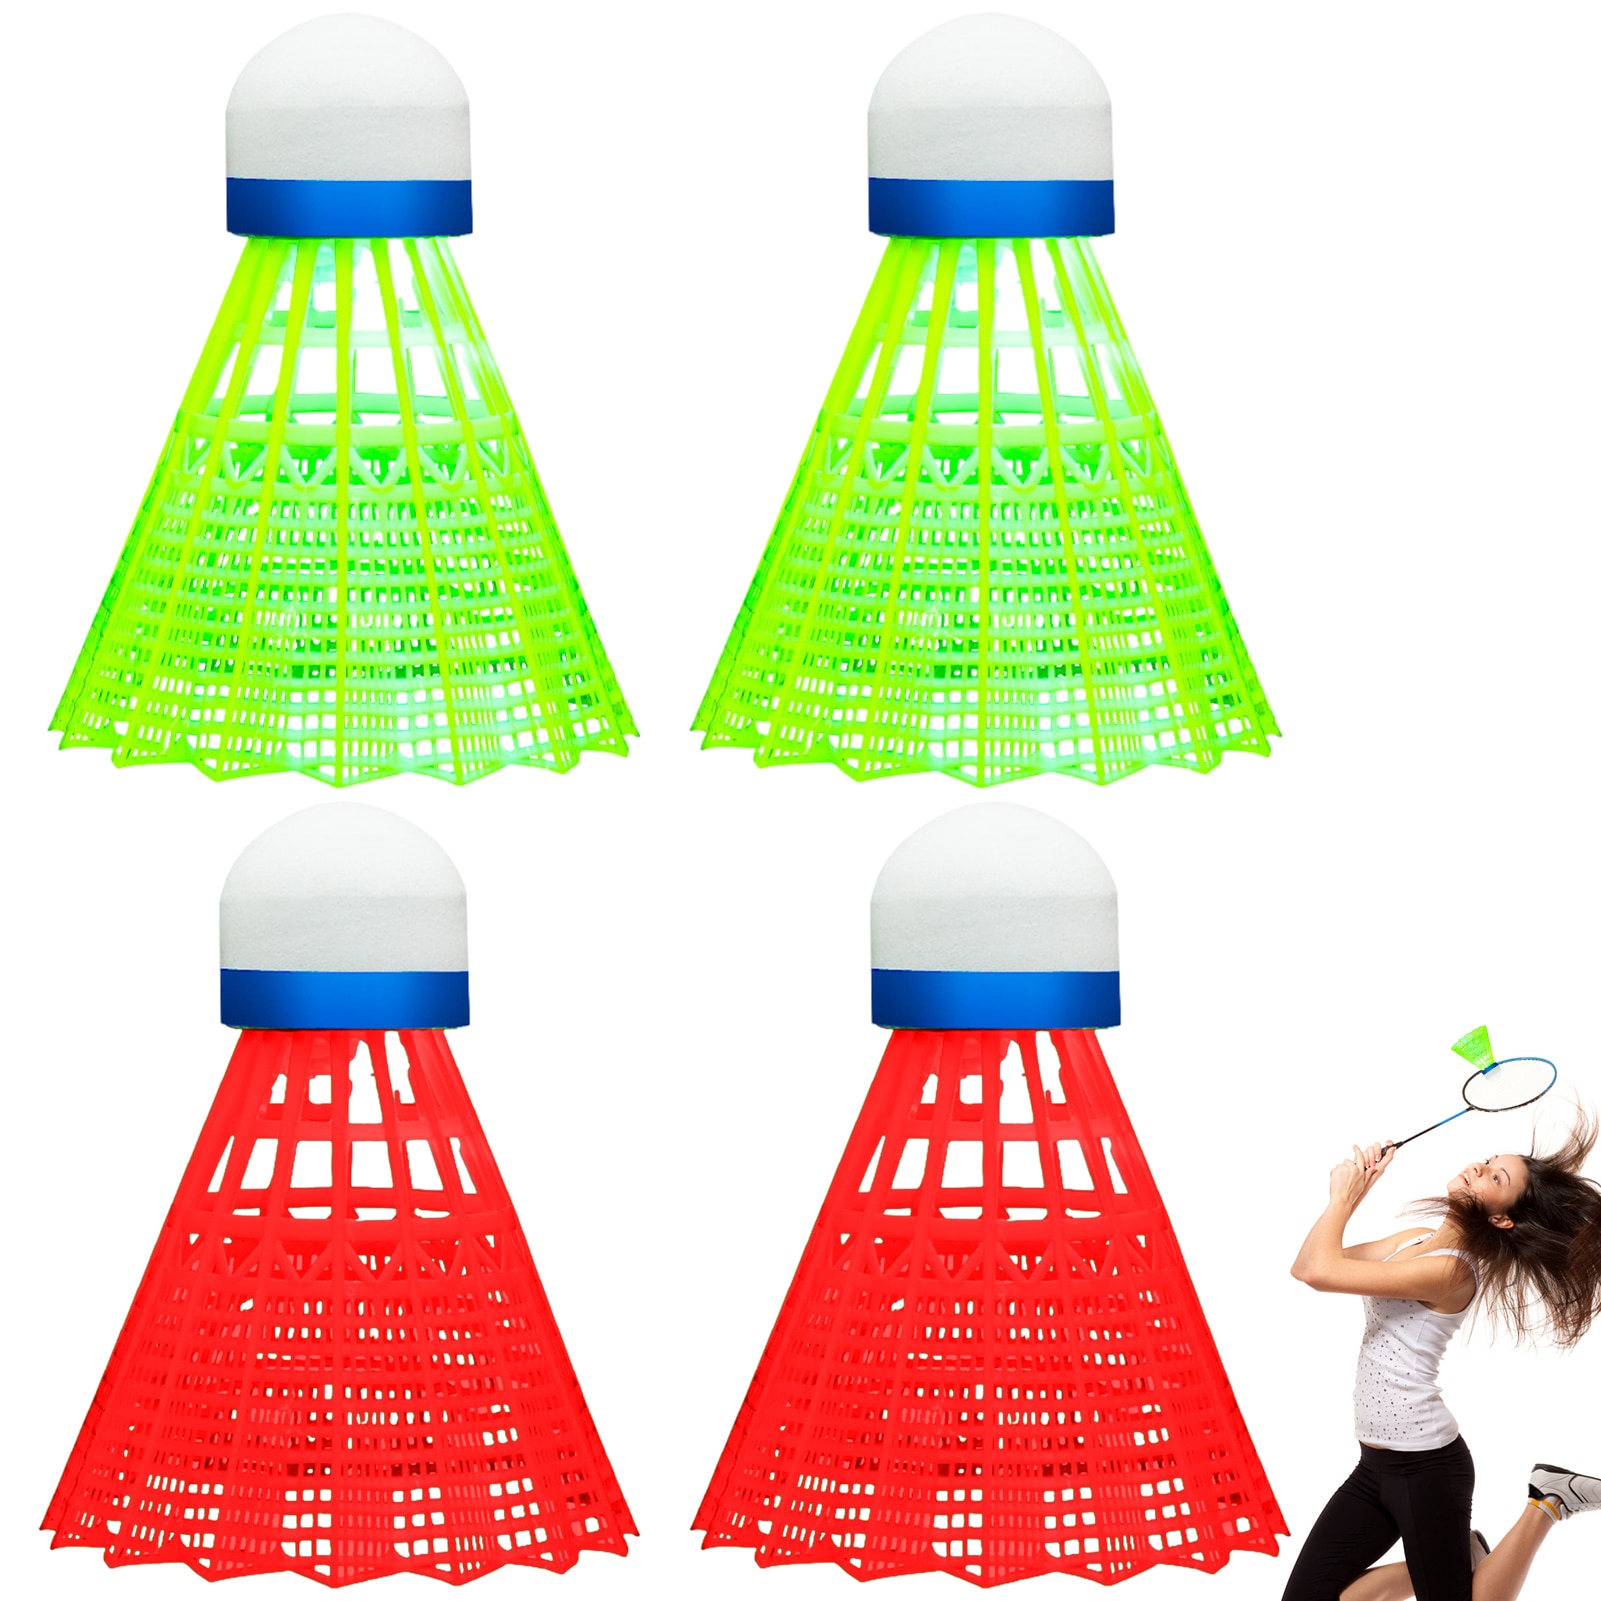 Dark Night LED Glowing Light Up Badminton Shuttlecocks Colorful Lighting Balls Indoor And Outdoor Sports